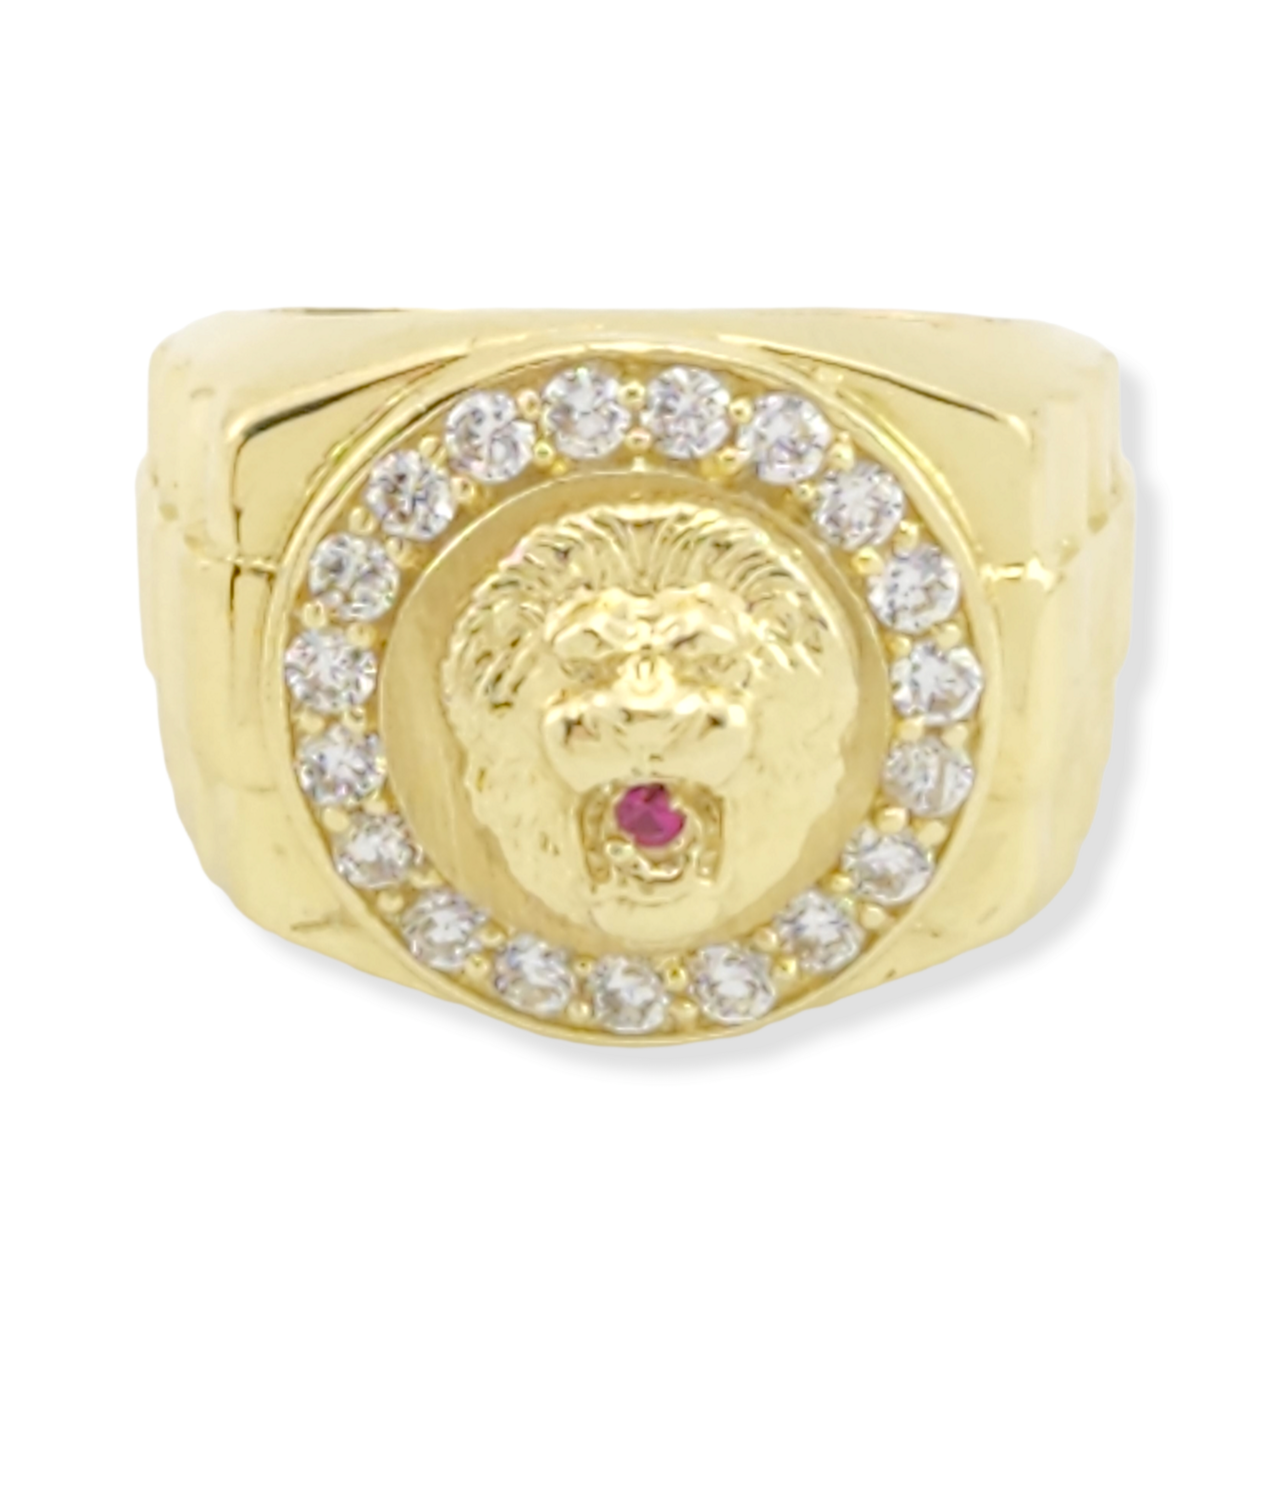 Buy Solid 18K Yellow Gold Mens Lion Ring With Diamond Eyes Size 5 15 Online  in India - Etsy